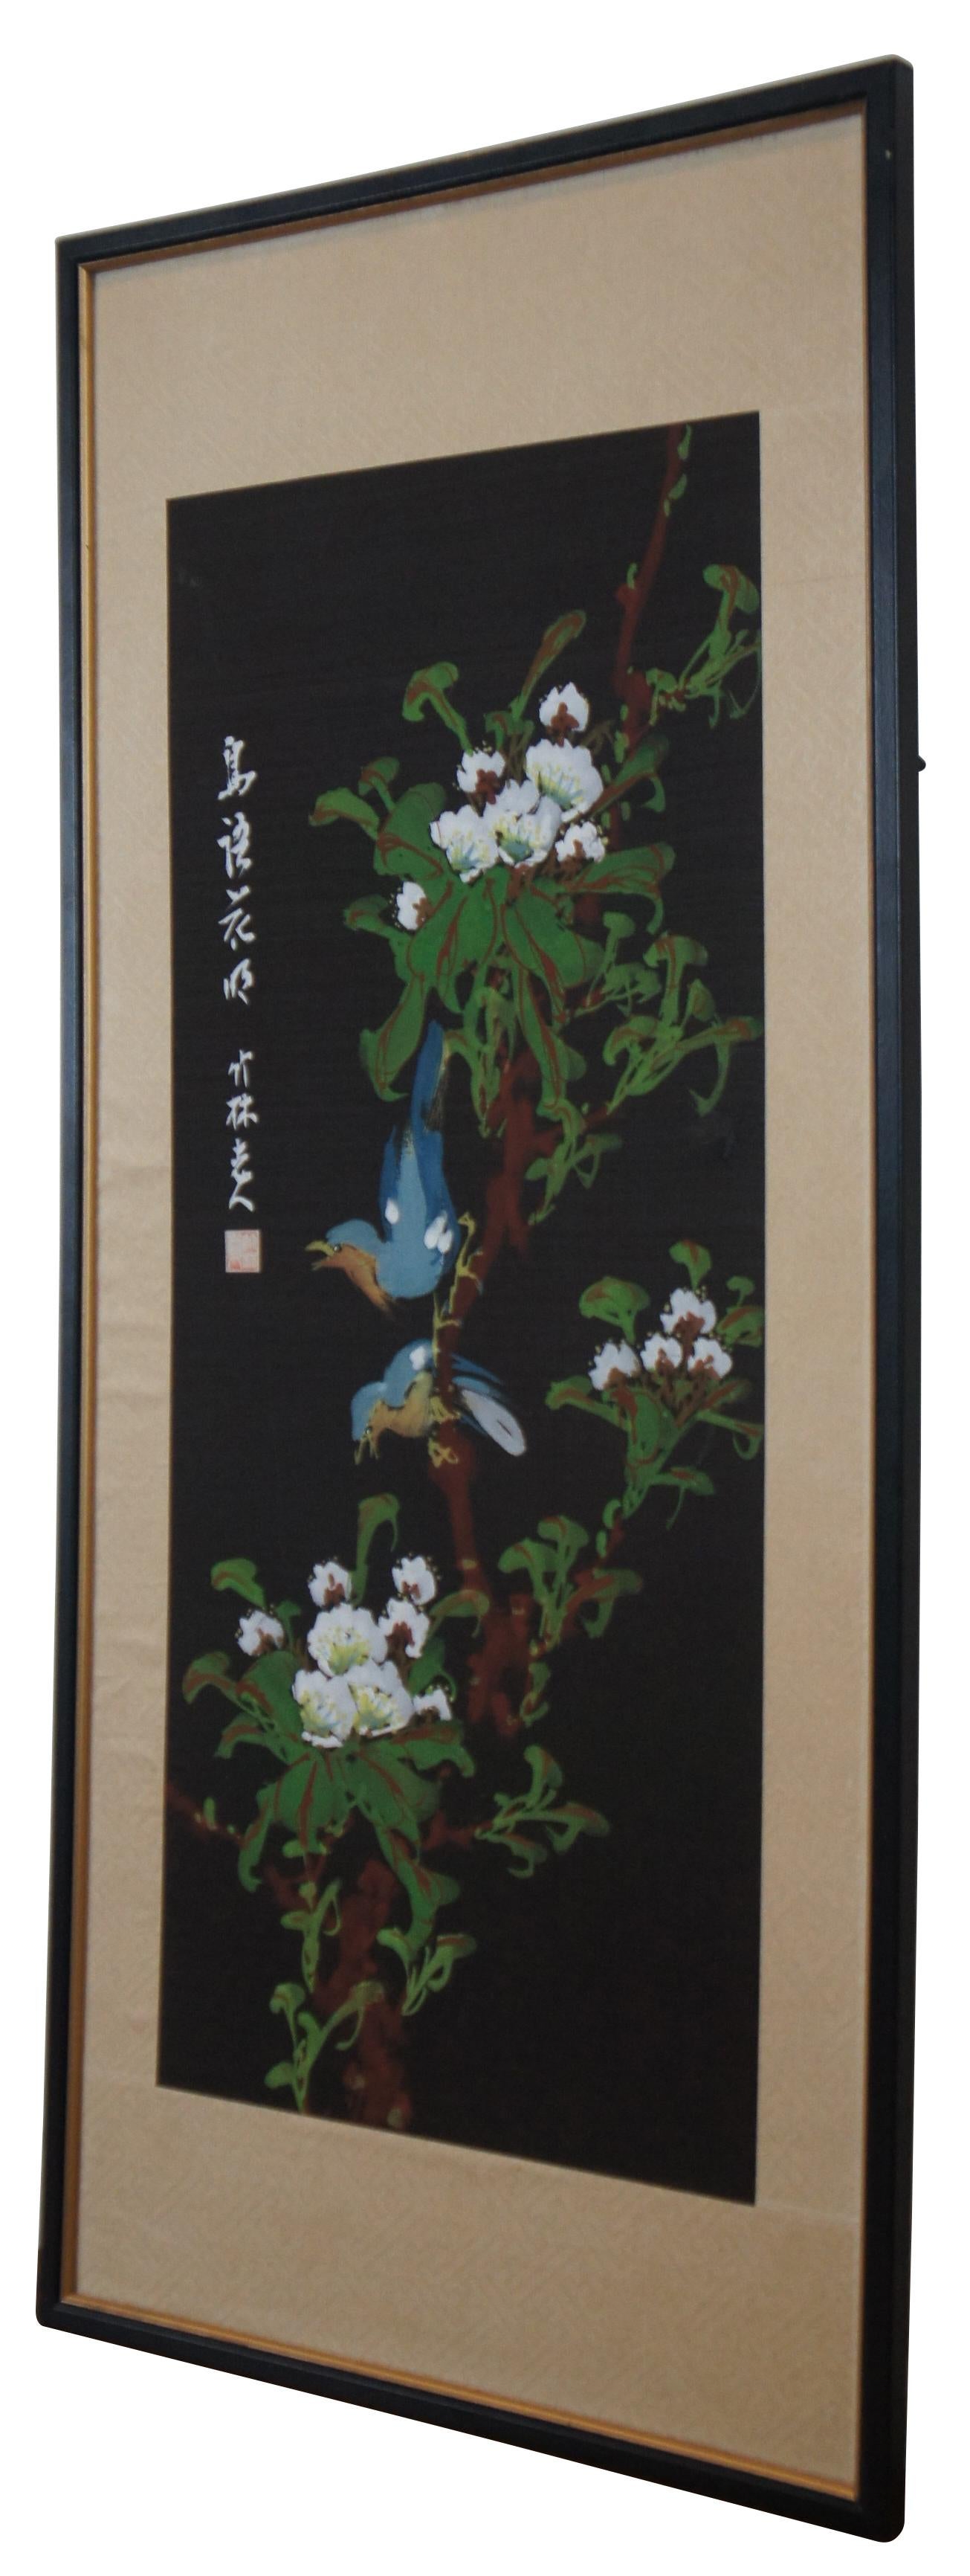 Vintage signed Chinese black silk panel painted with a pair of robins perched on a flowering branch.

Measures: 13.75” x 0.5” x 30.5” / Sans Frame - 12.5” x 29.25” (Width x Depth x Height).